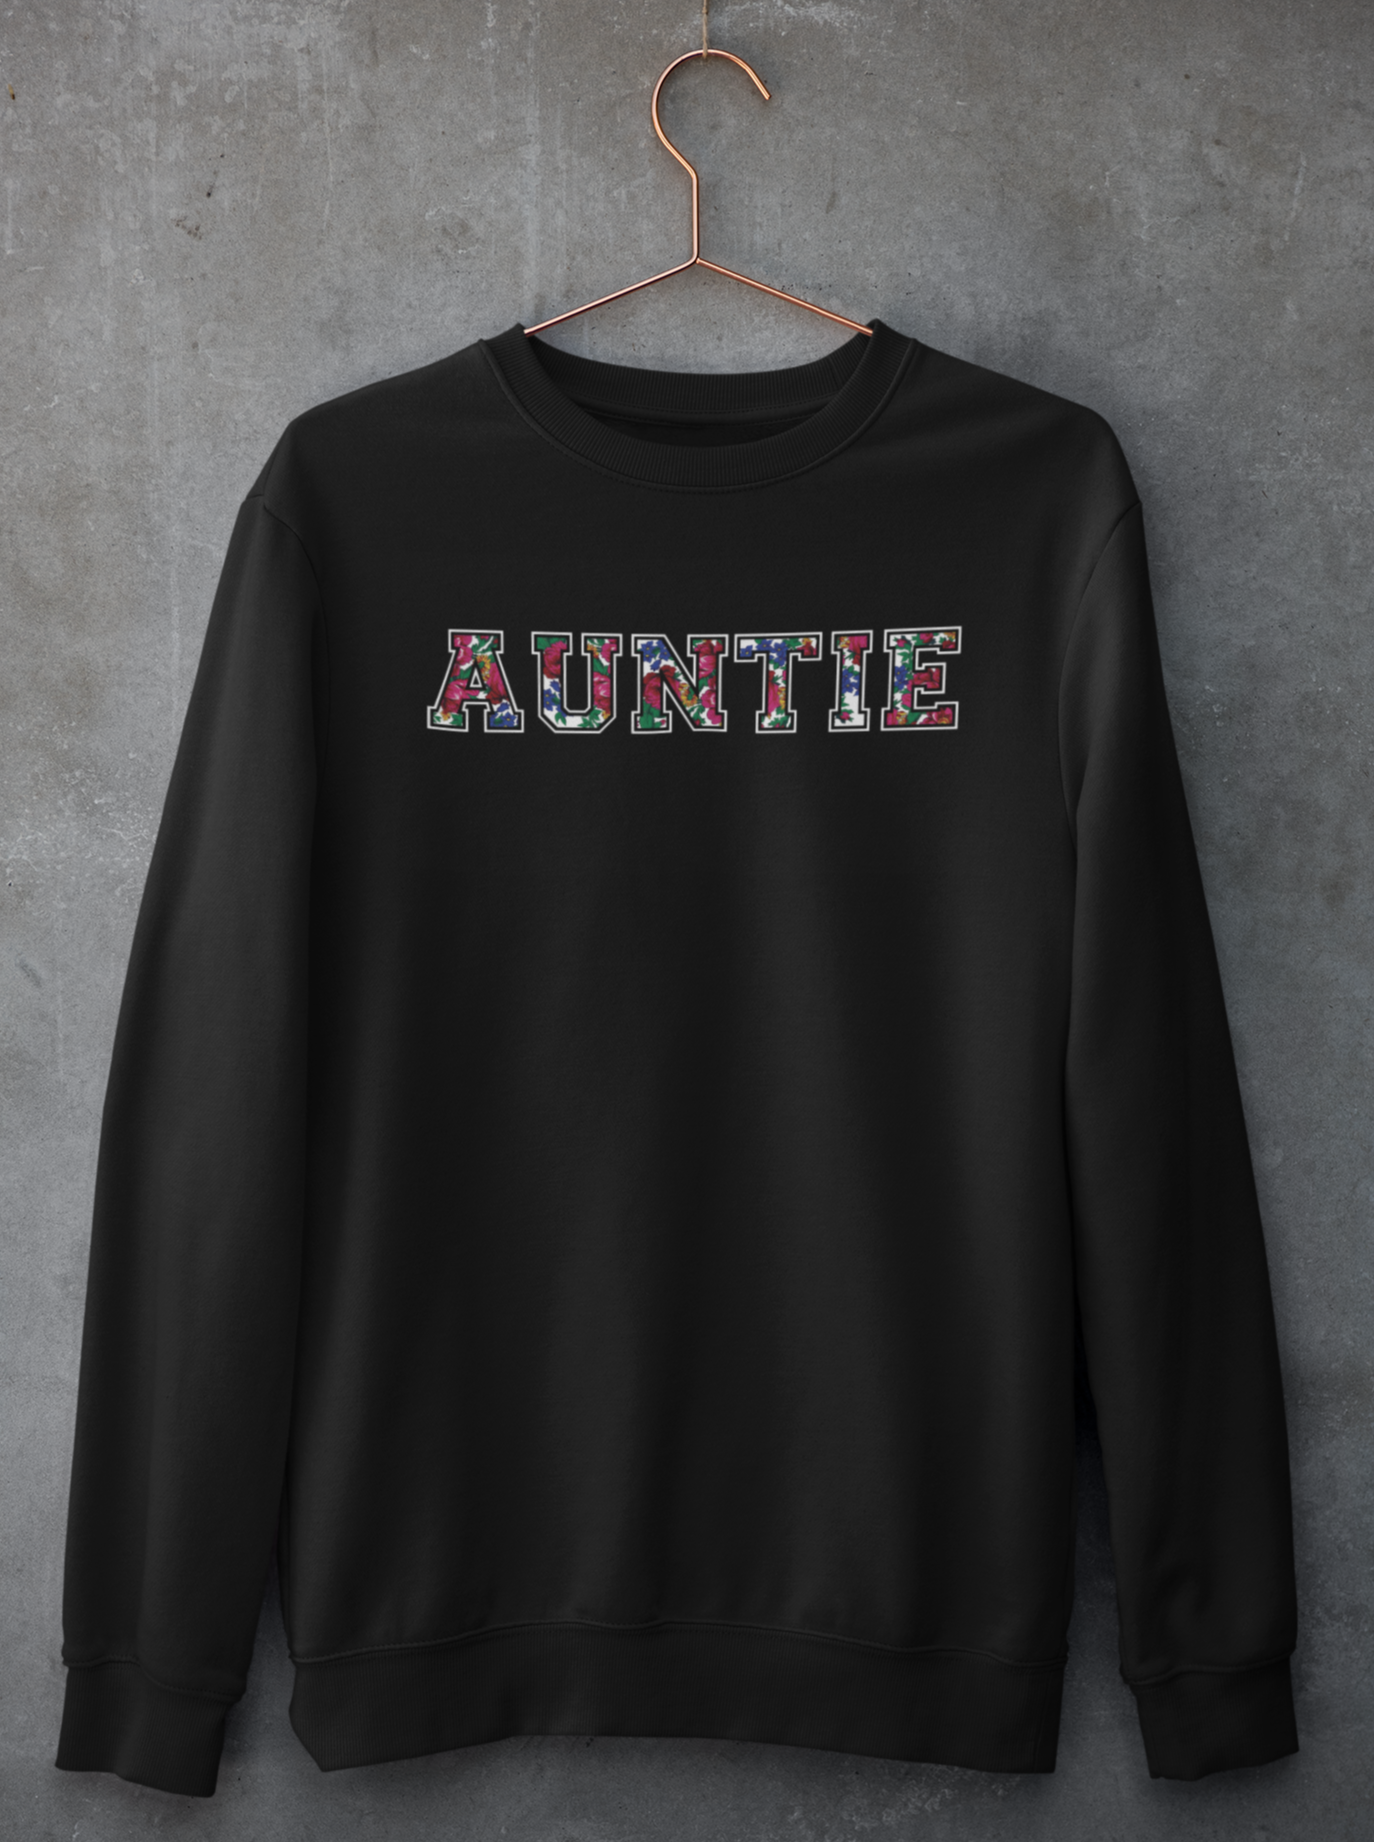 Black crewneck sweater with Auntie floral graphic on hanger against concrete backdrop